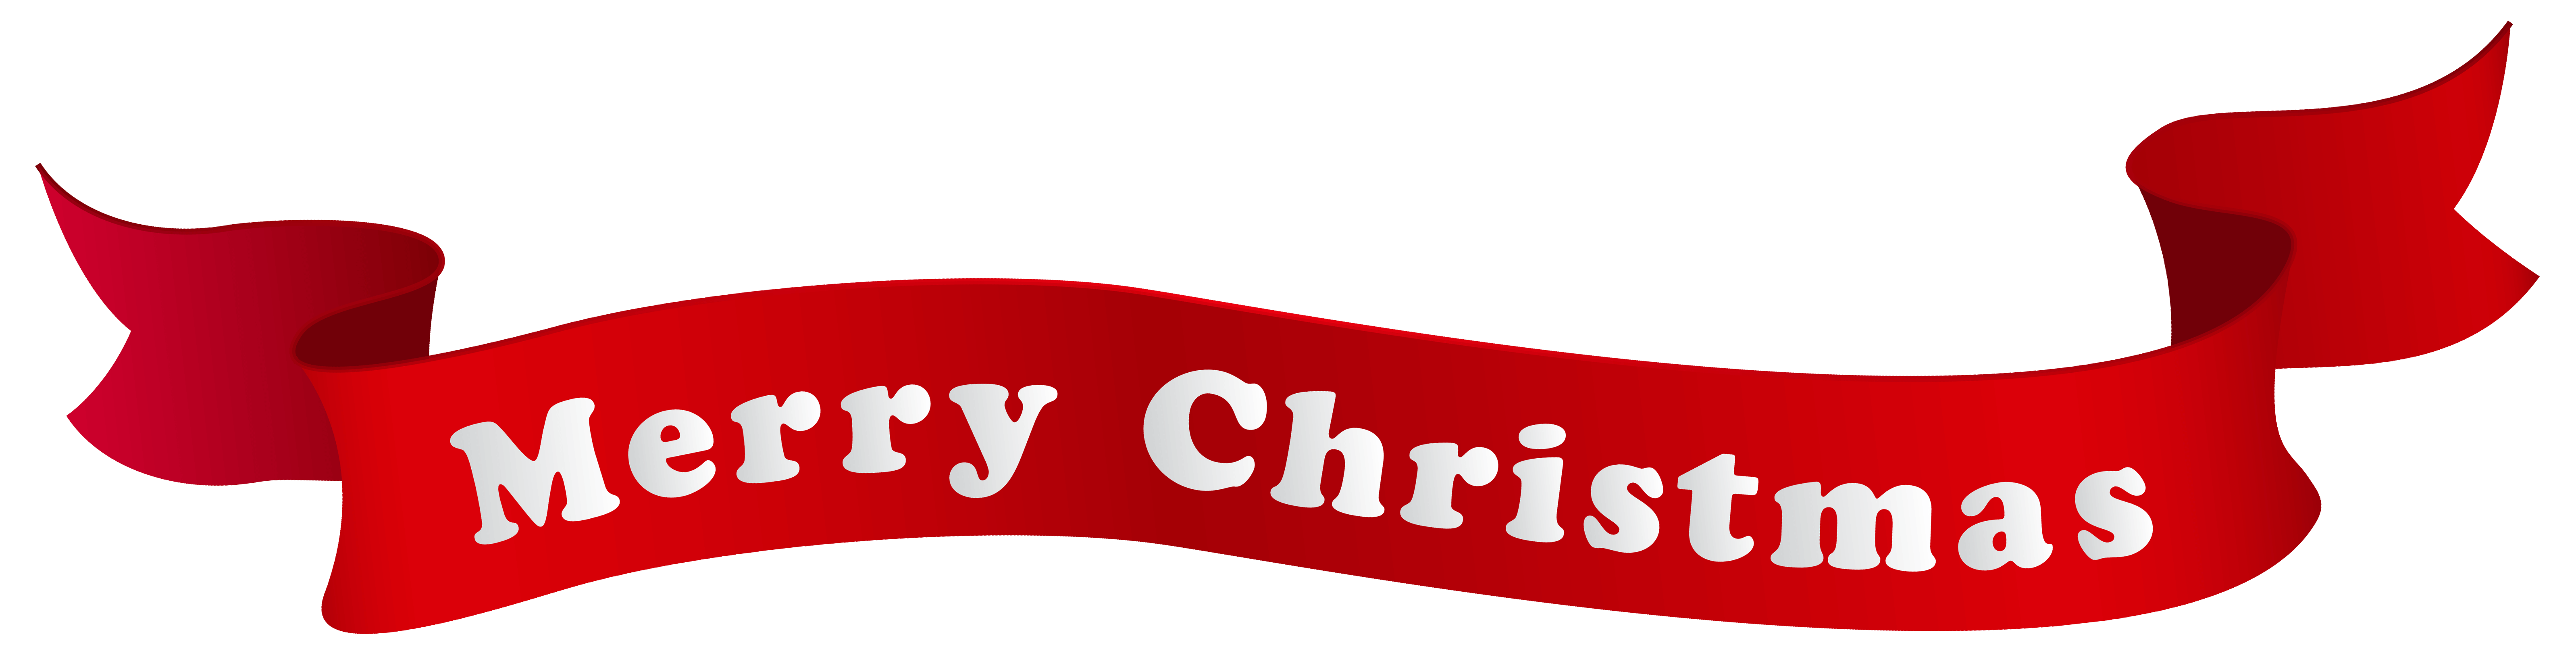 Merry_Christmas_Banner_PNG_Clipart_Image - Kerstbomen Amsterdam